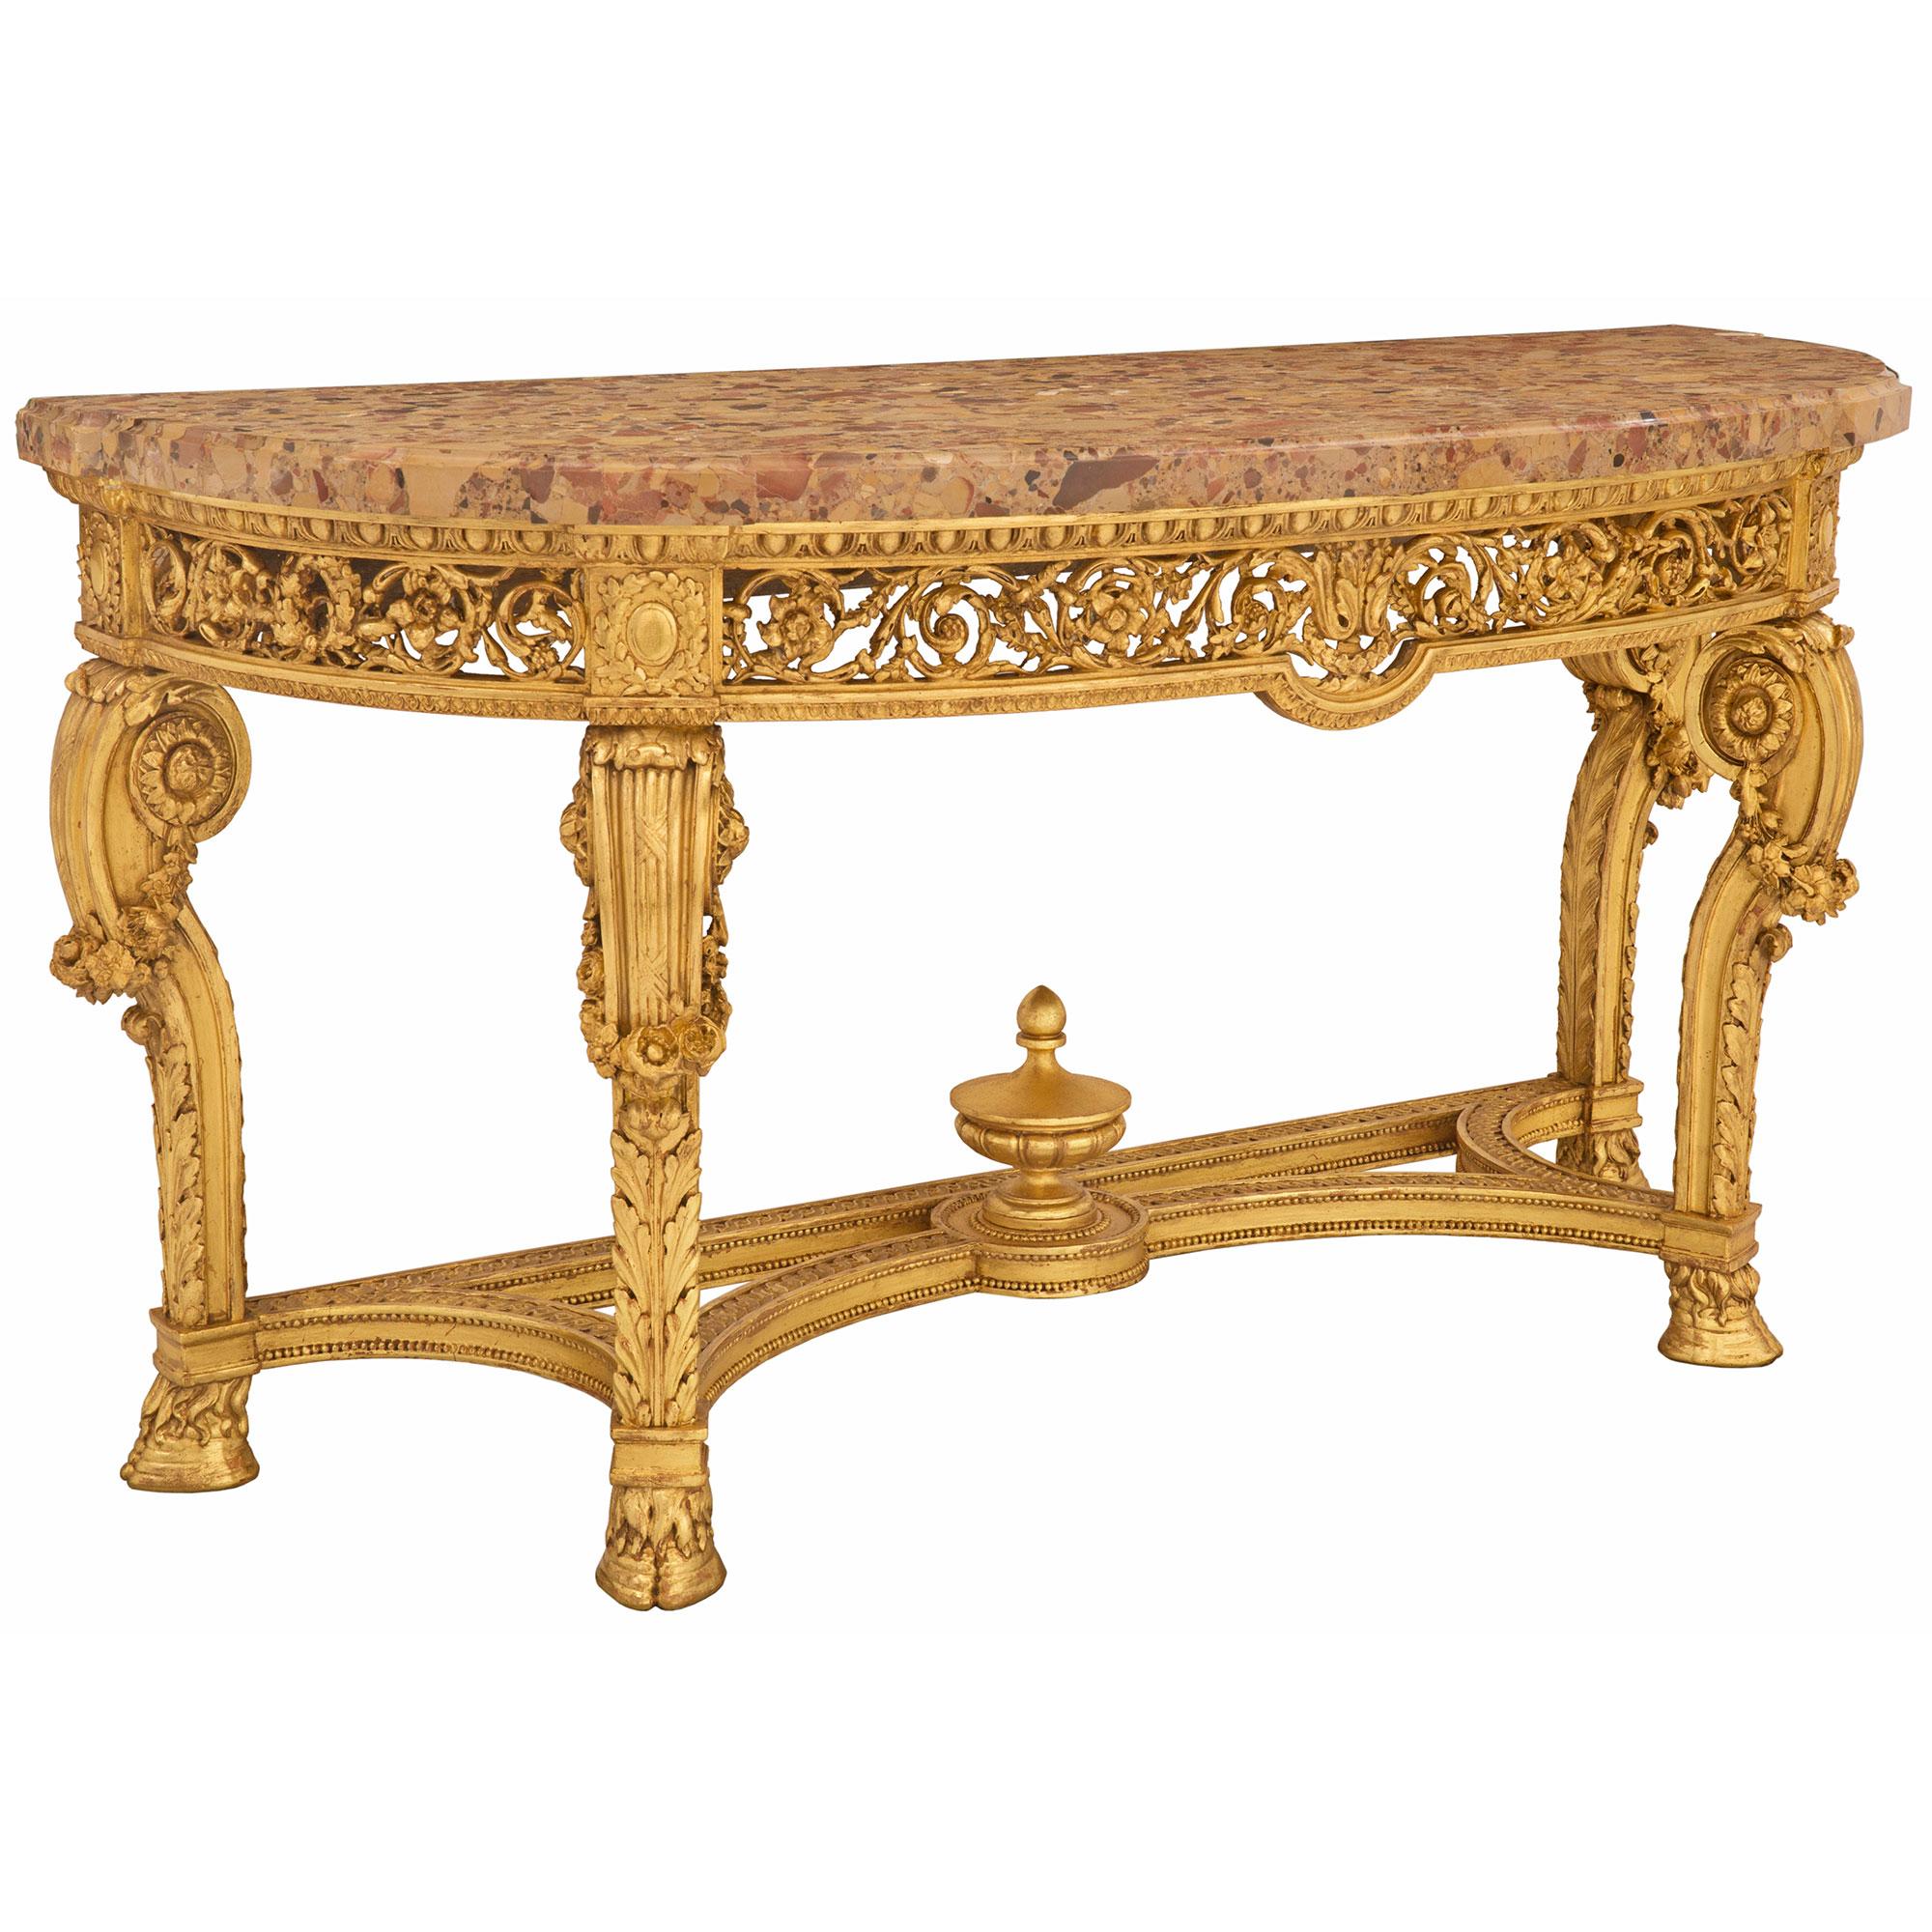 French 19th Century Louis XVI Style Giltwood and Brèche D’Alep Marble Console In Good Condition For Sale In West Palm Beach, FL